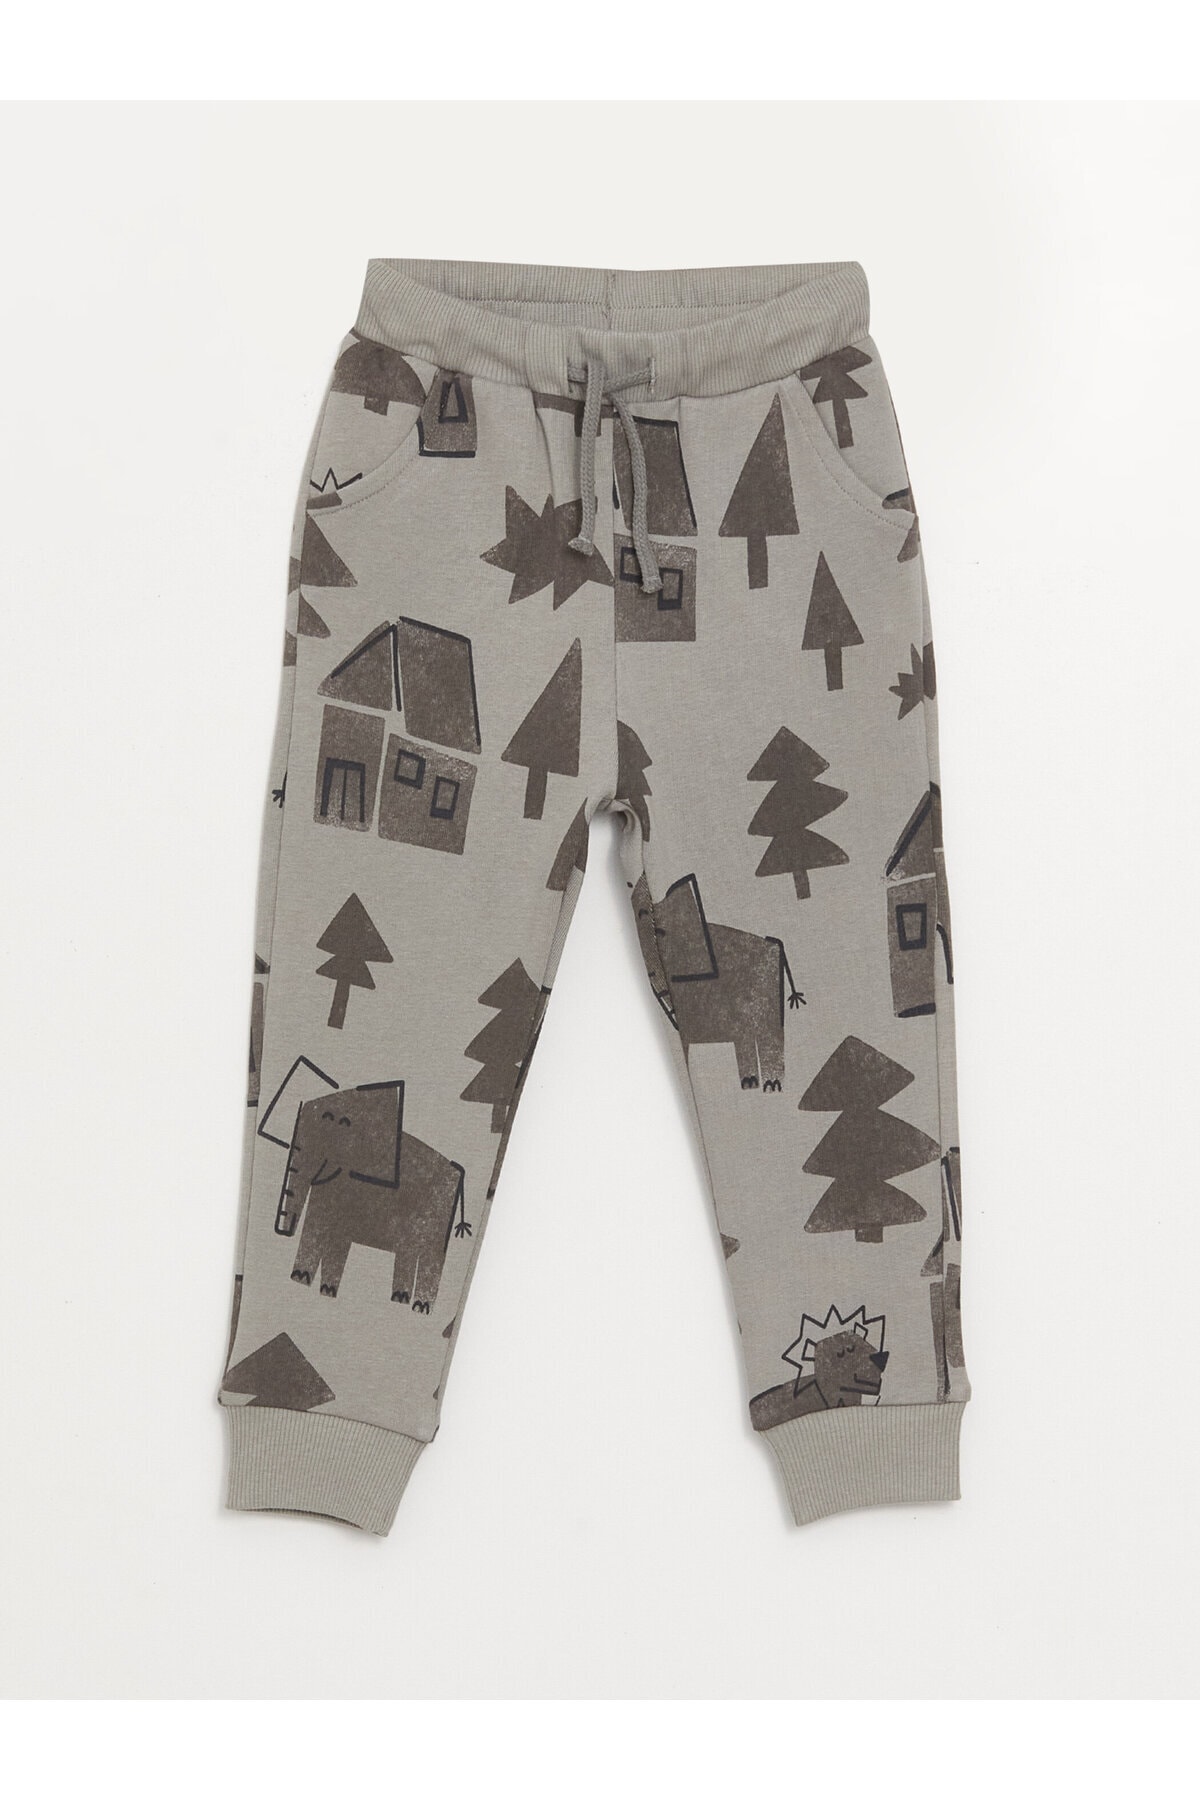 LC Waikiki Baby Boy Tracksuit Bottoms With An Elastic Printed Waist.